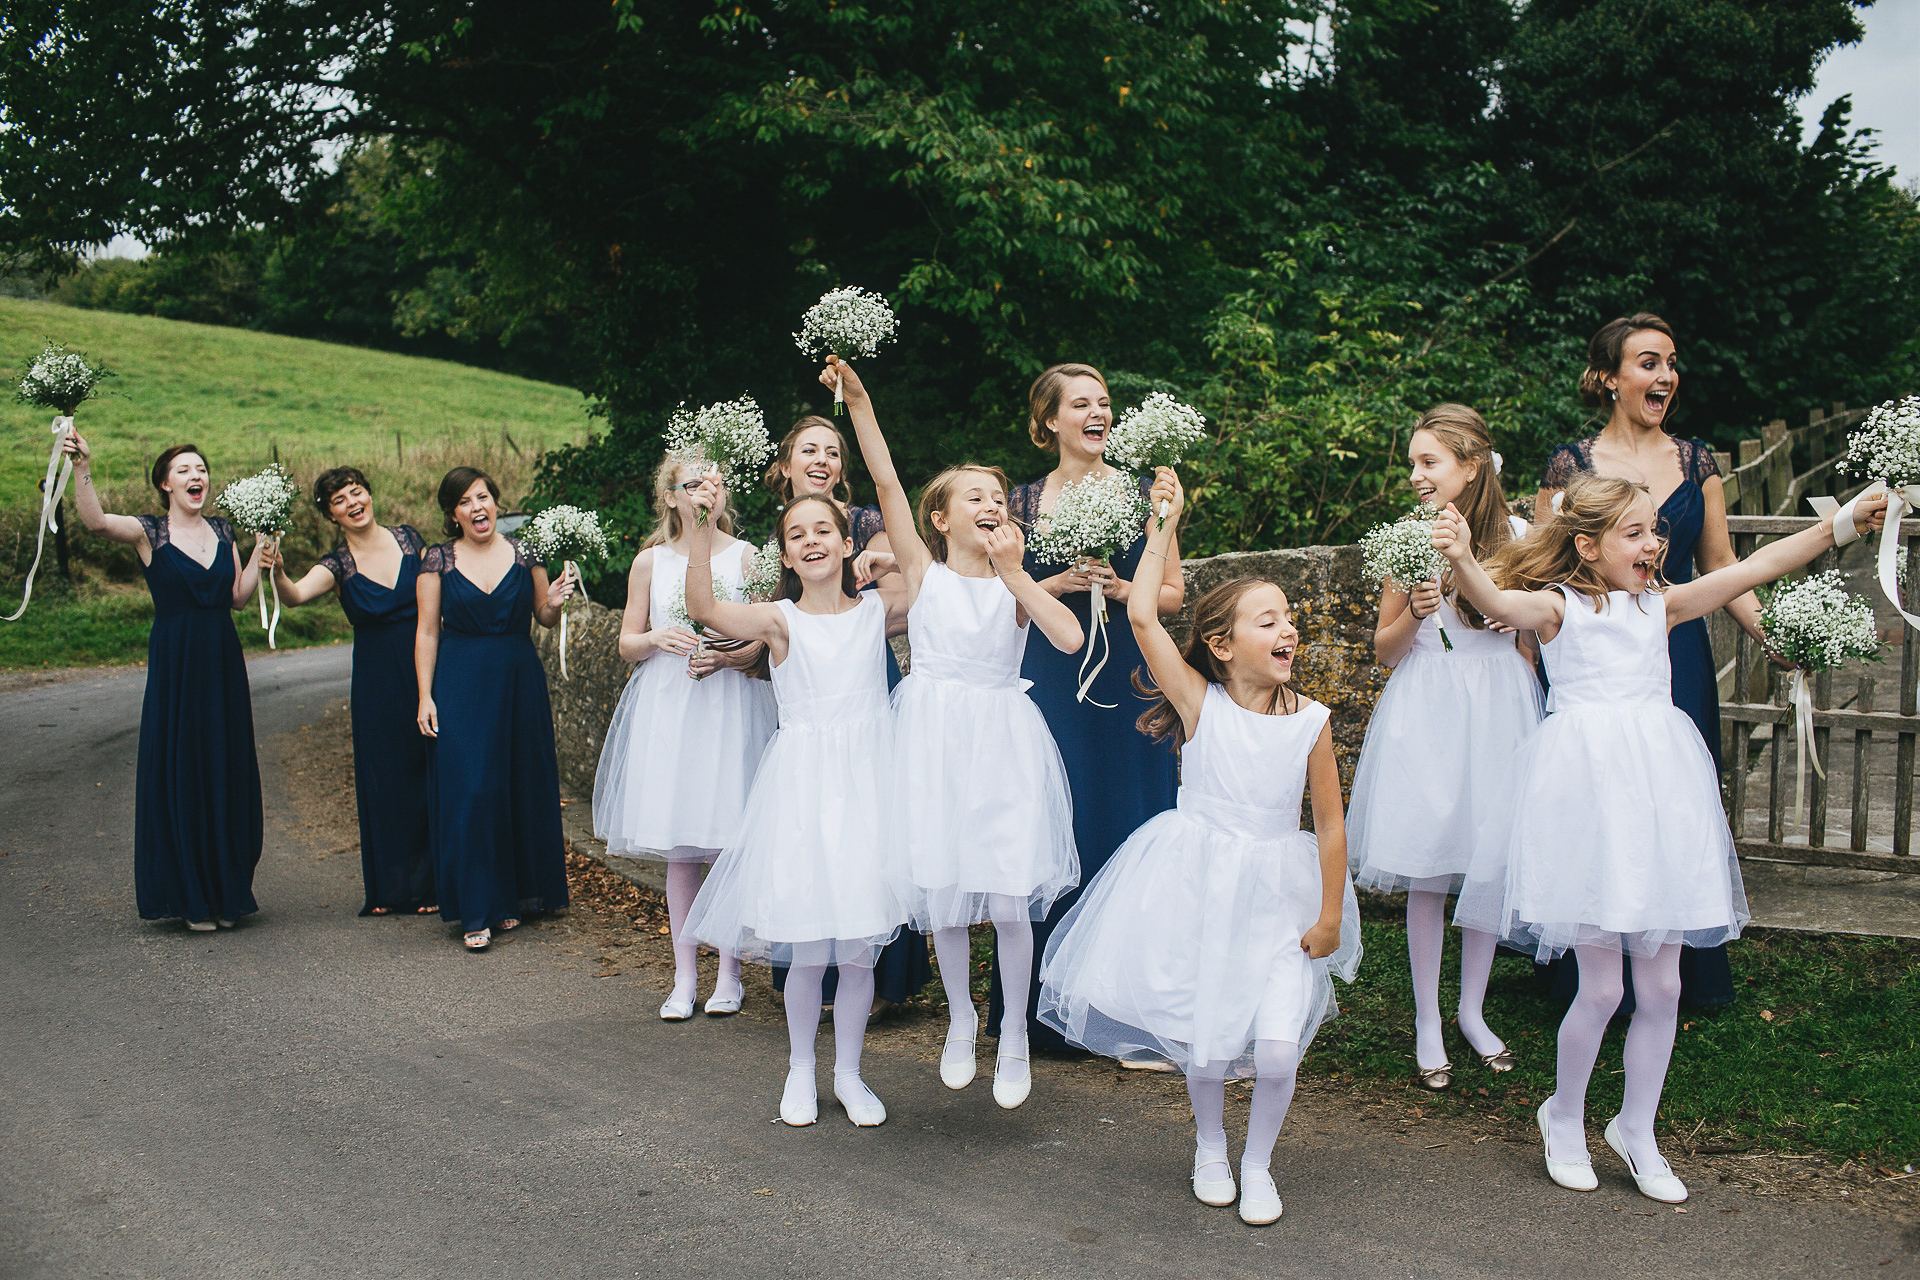 Group of bridesmaids and flower girls waving excitedly